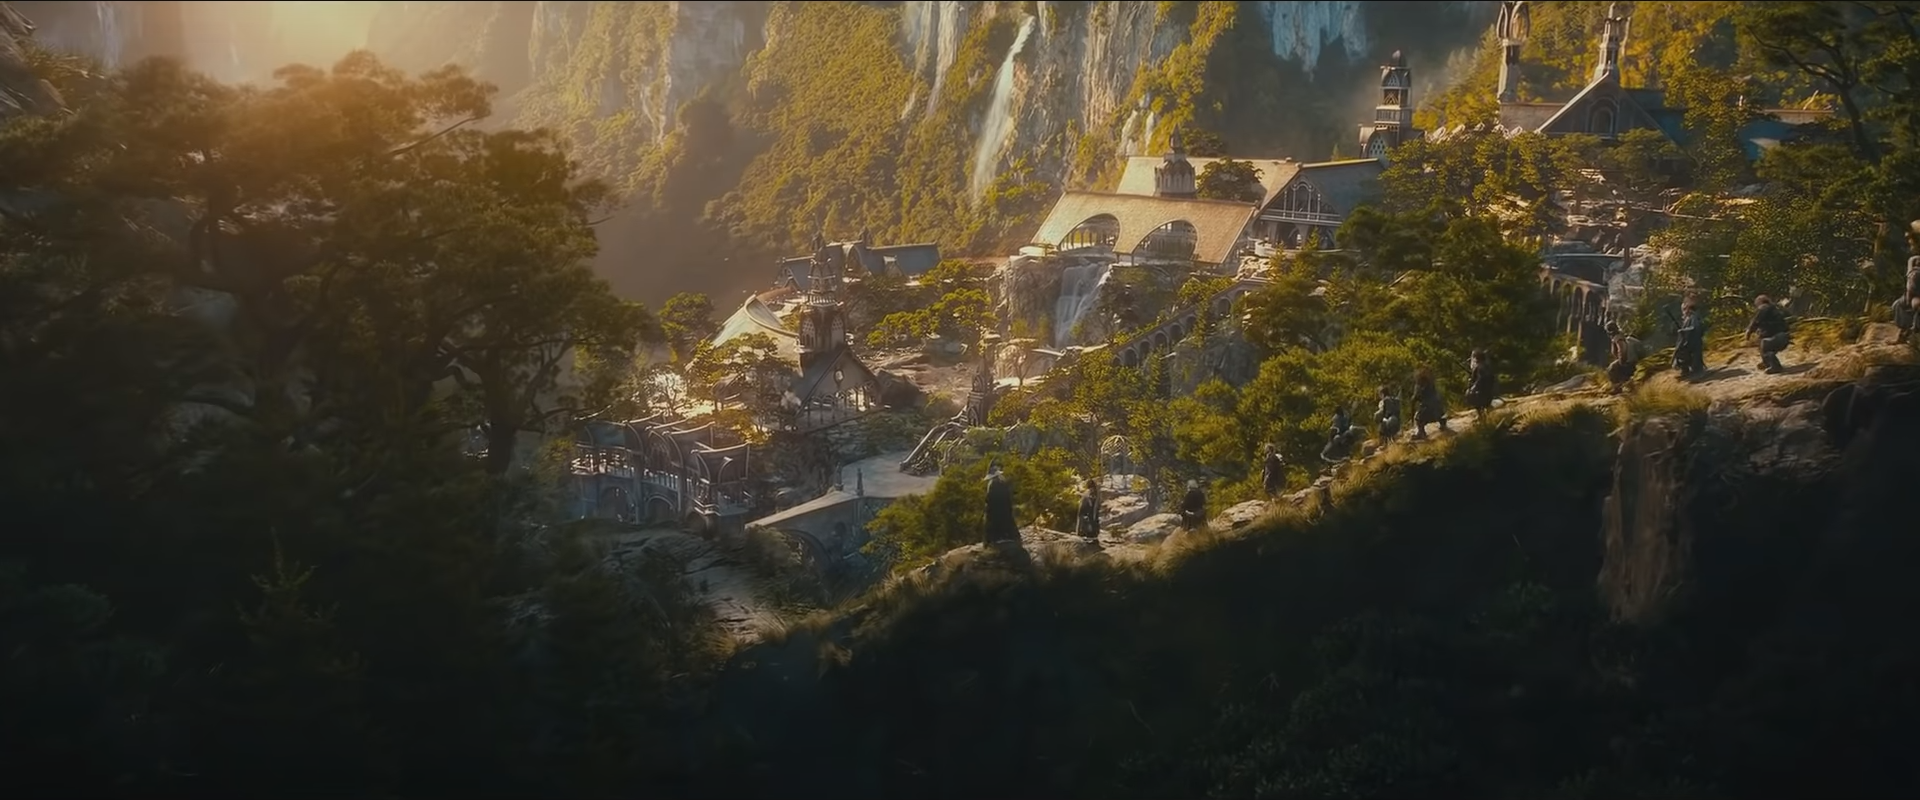 rivendell 2.png